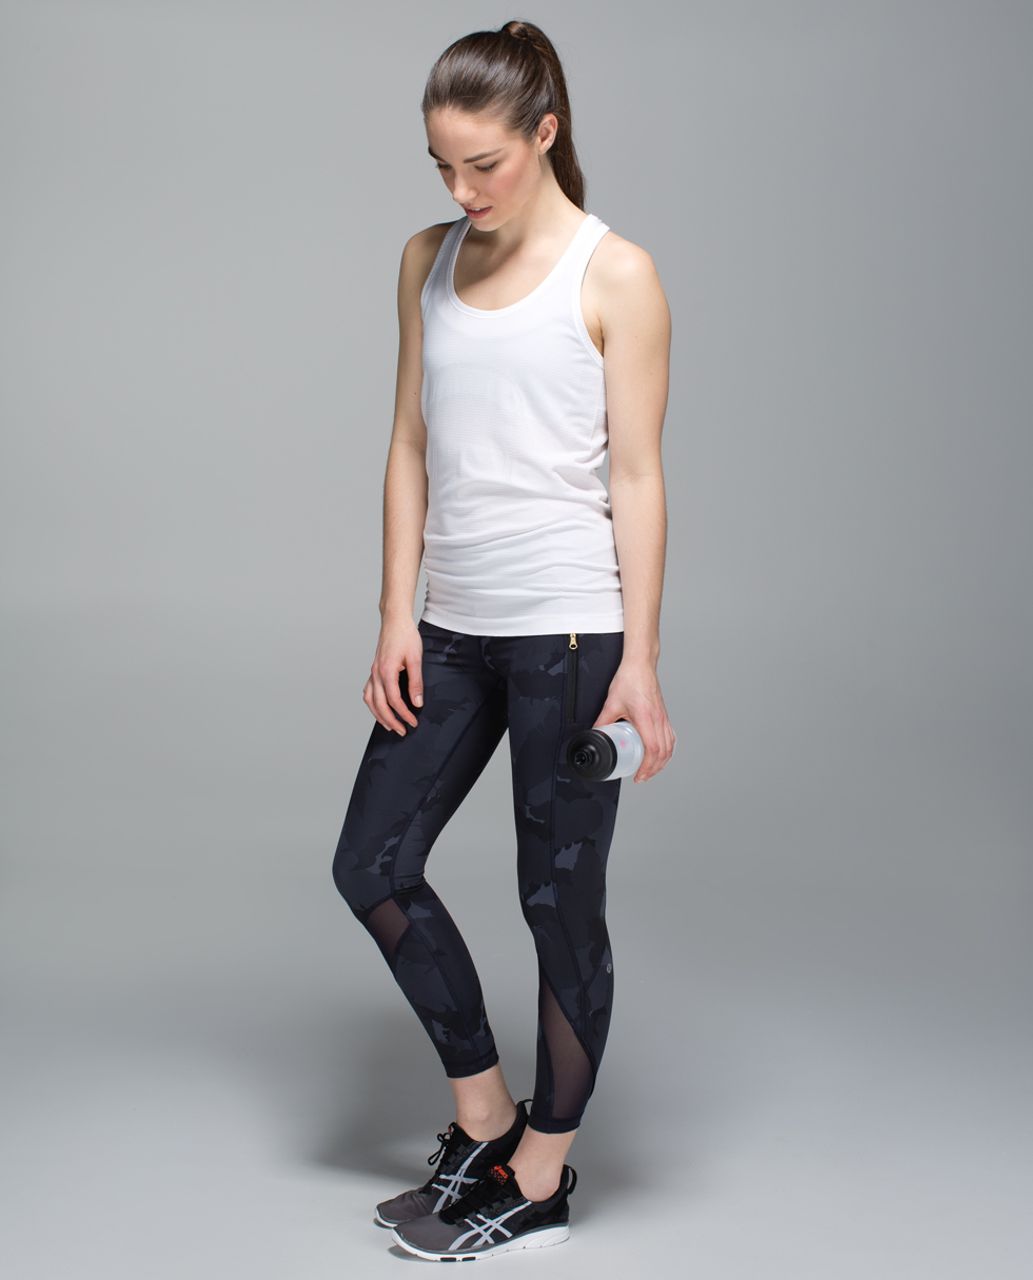 Lululemon Inspire Tight II *Full-On Luxtreme (Mesh) - Palm Party Naval Blue Black / Naval Blue